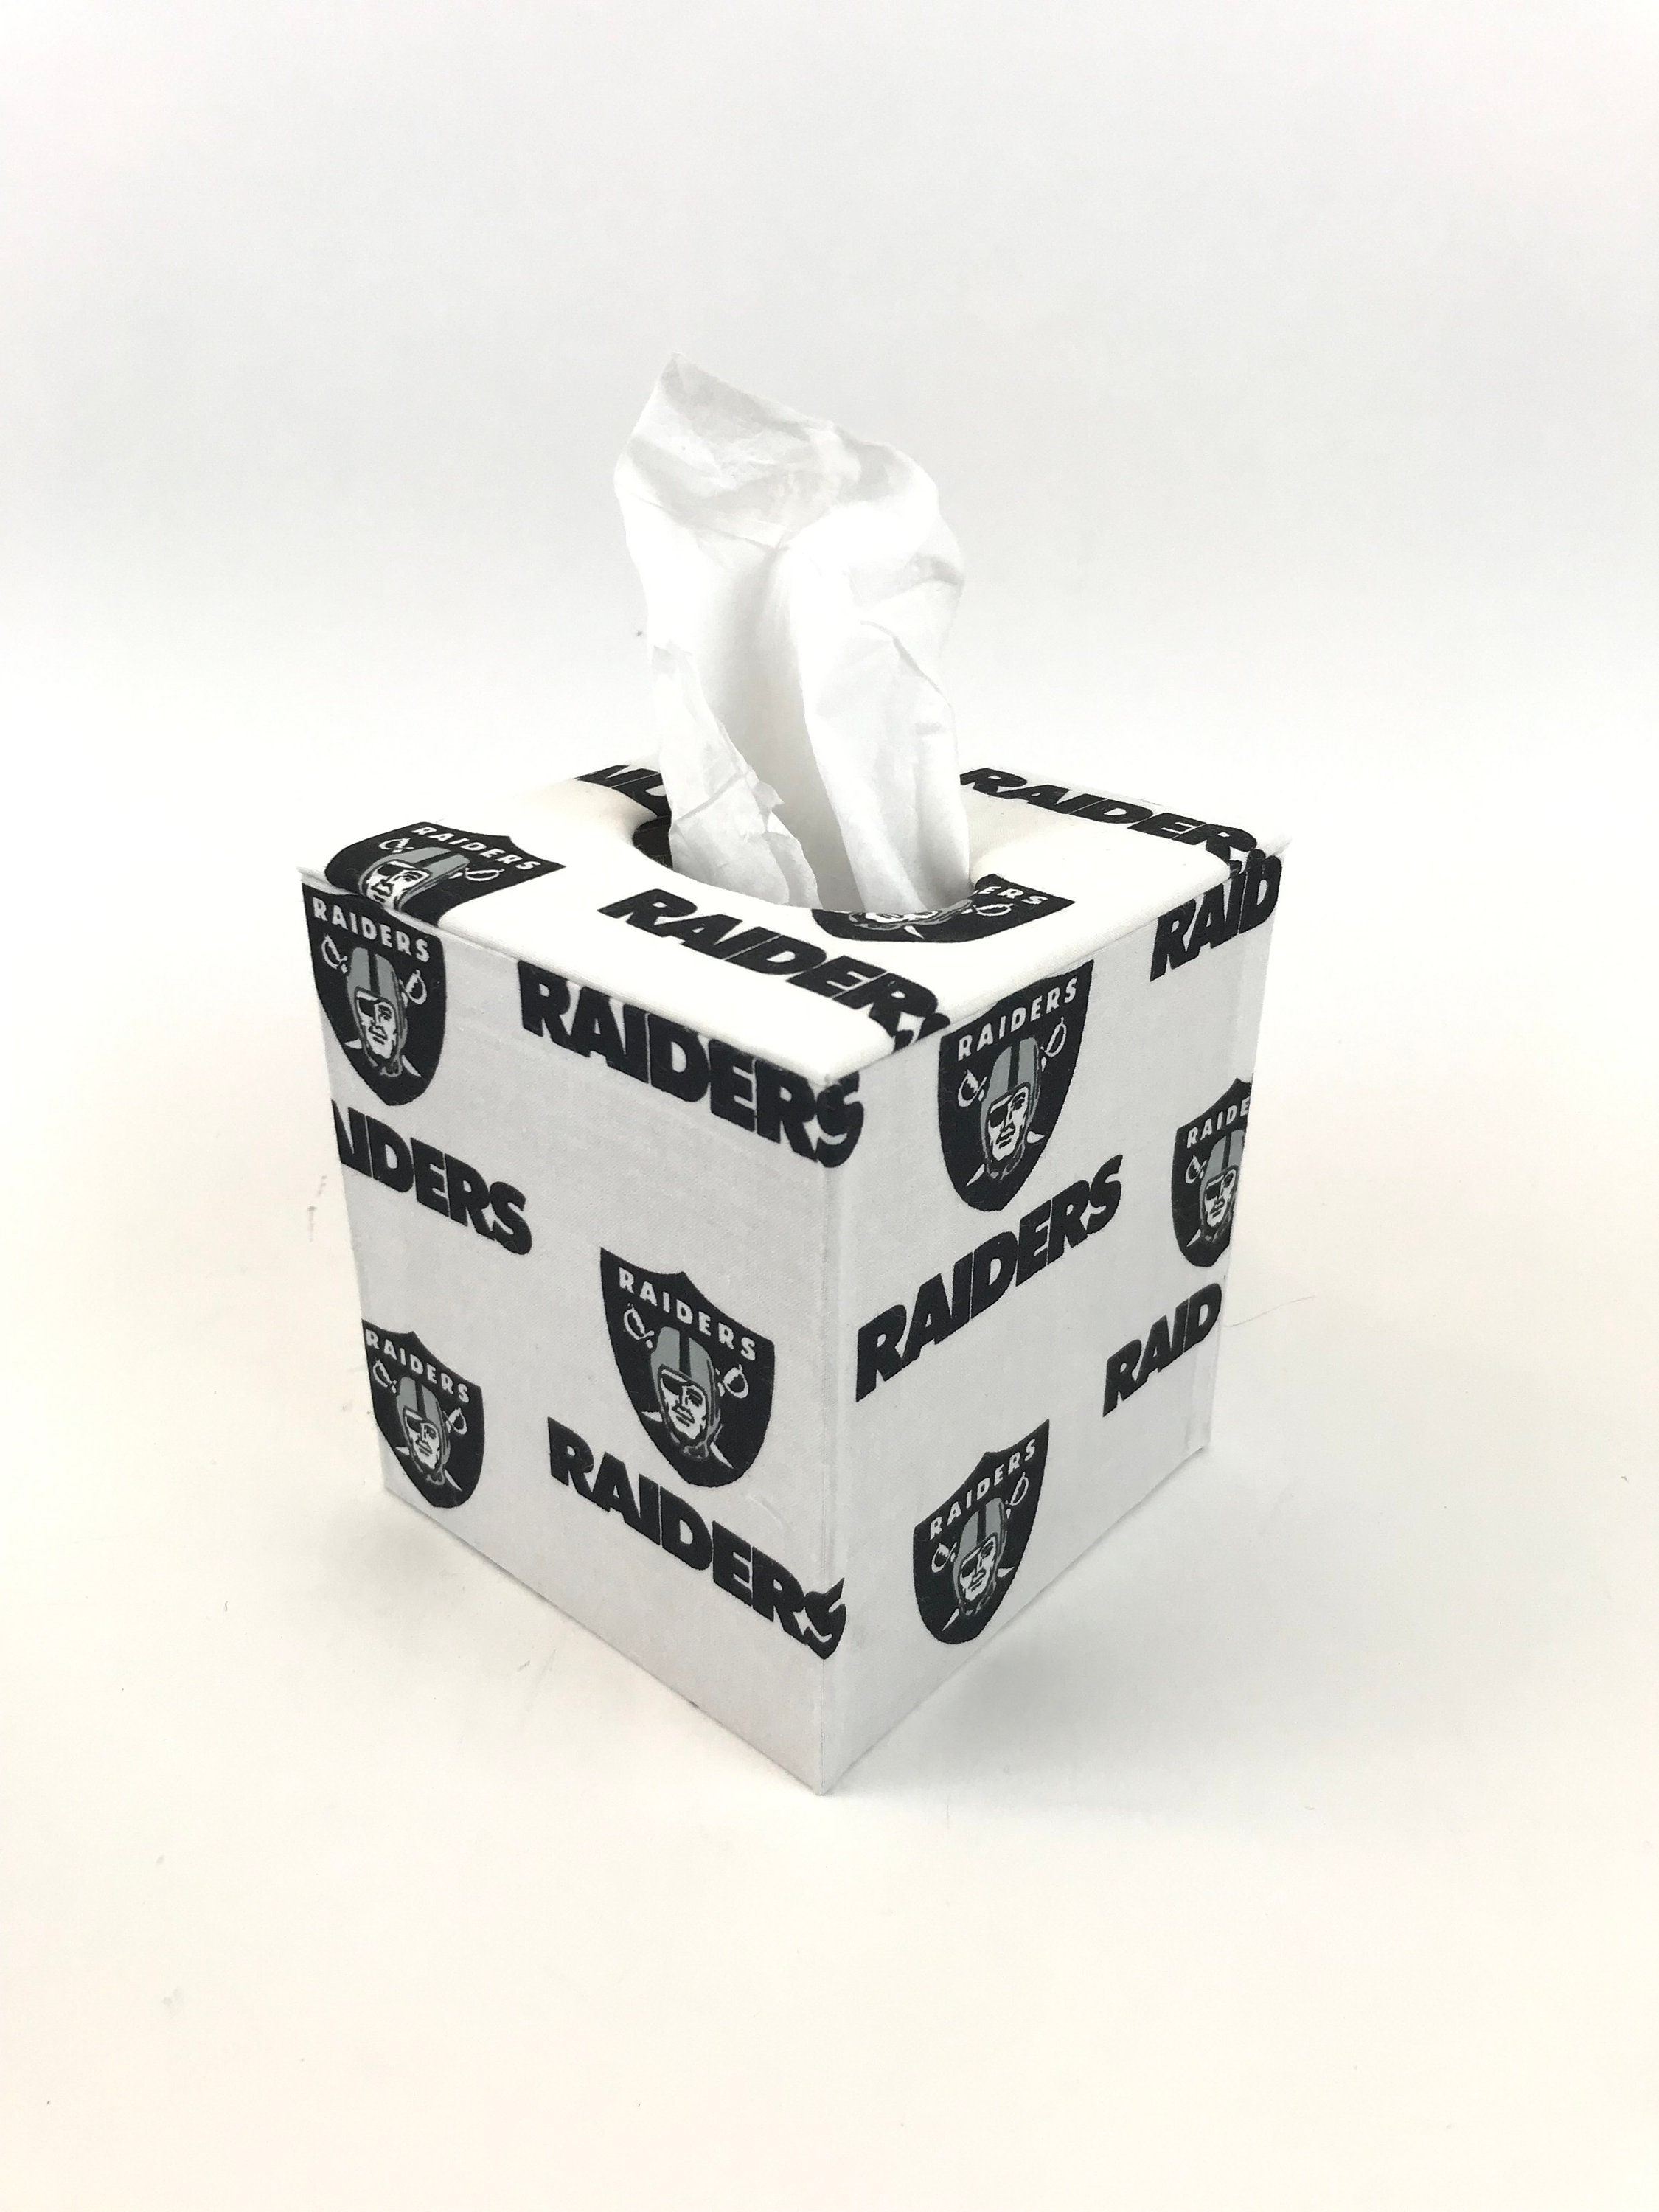 Tissue Box Cover Made With Las Vegas Raiders Fabric 